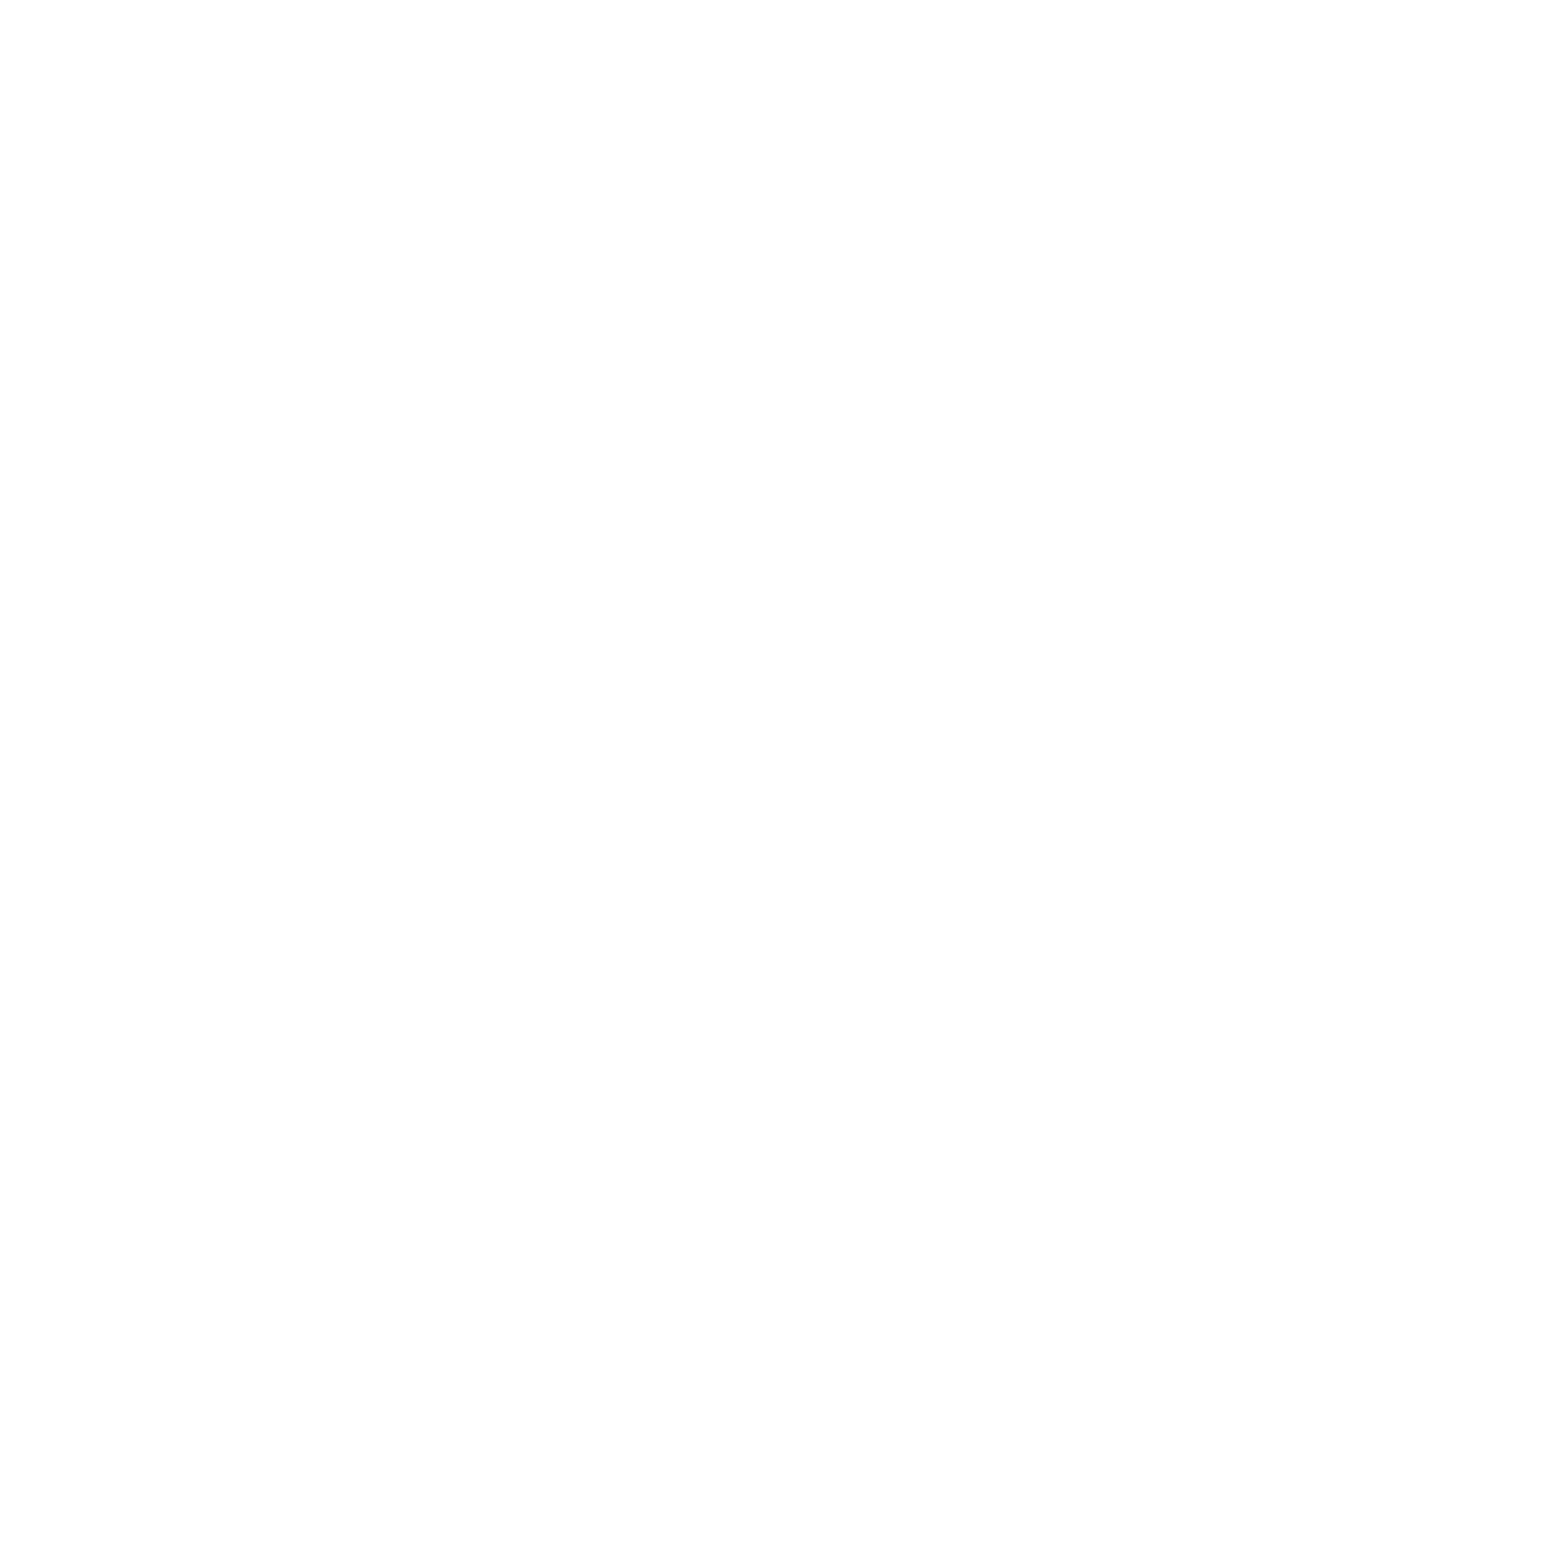 Buy Tickets to Wakaan Music Festival 2022 in Ozark on Sep 28, 2022 - Oct  01,2022